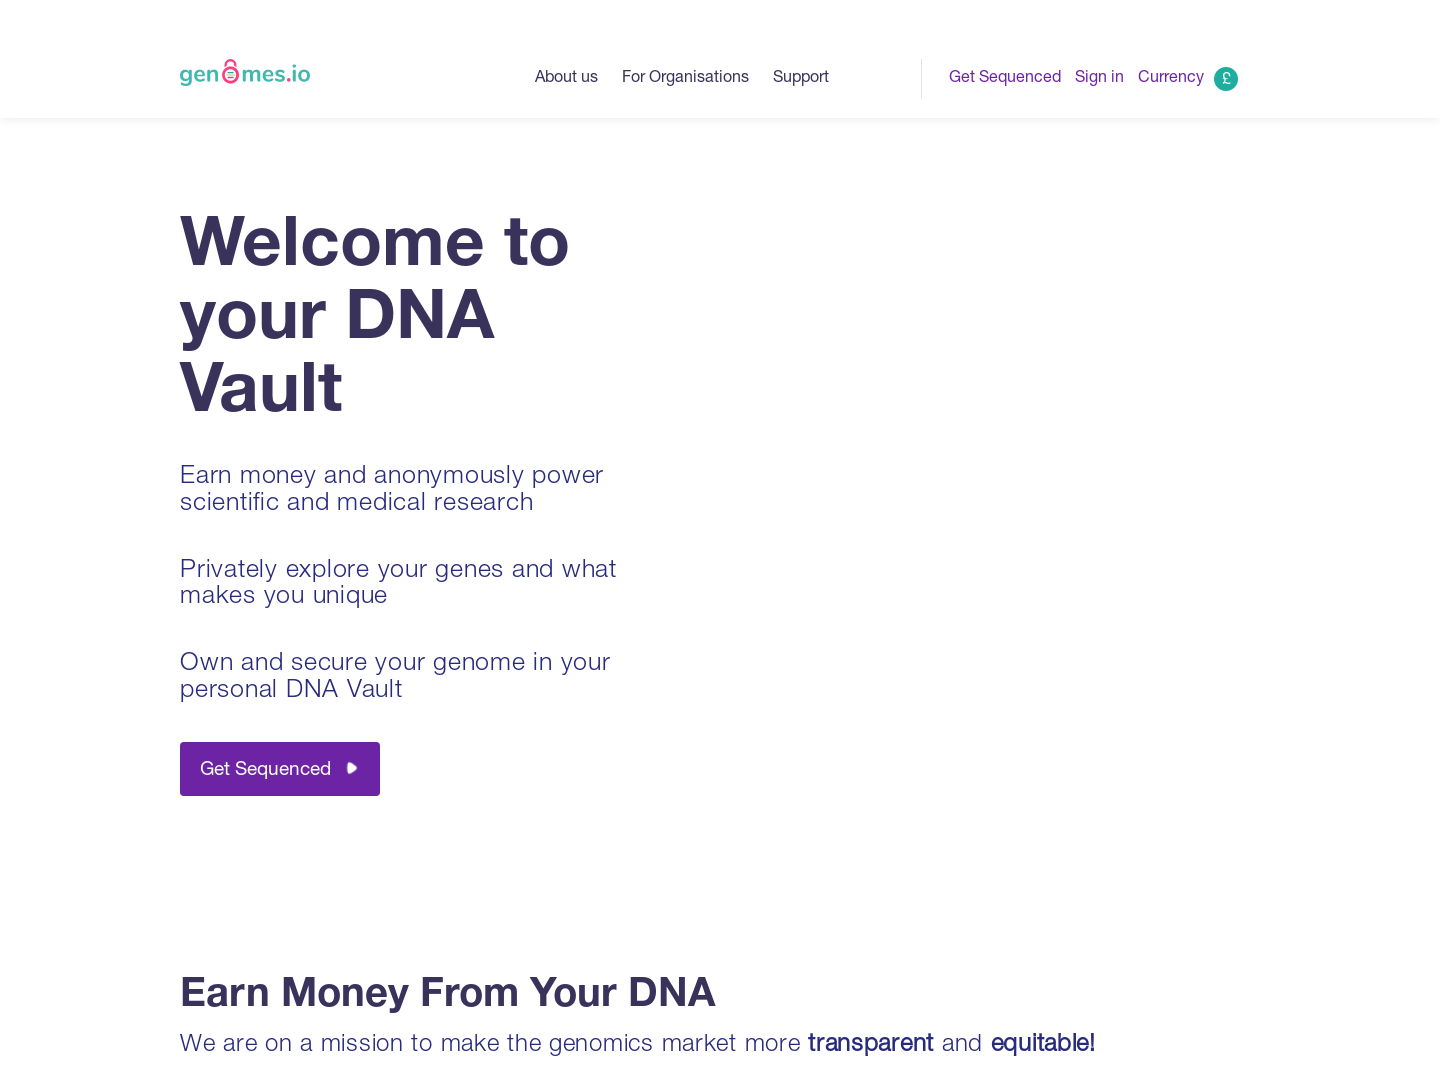 Genomes.io Secures $20m Investment to Advance DNA Data Storage